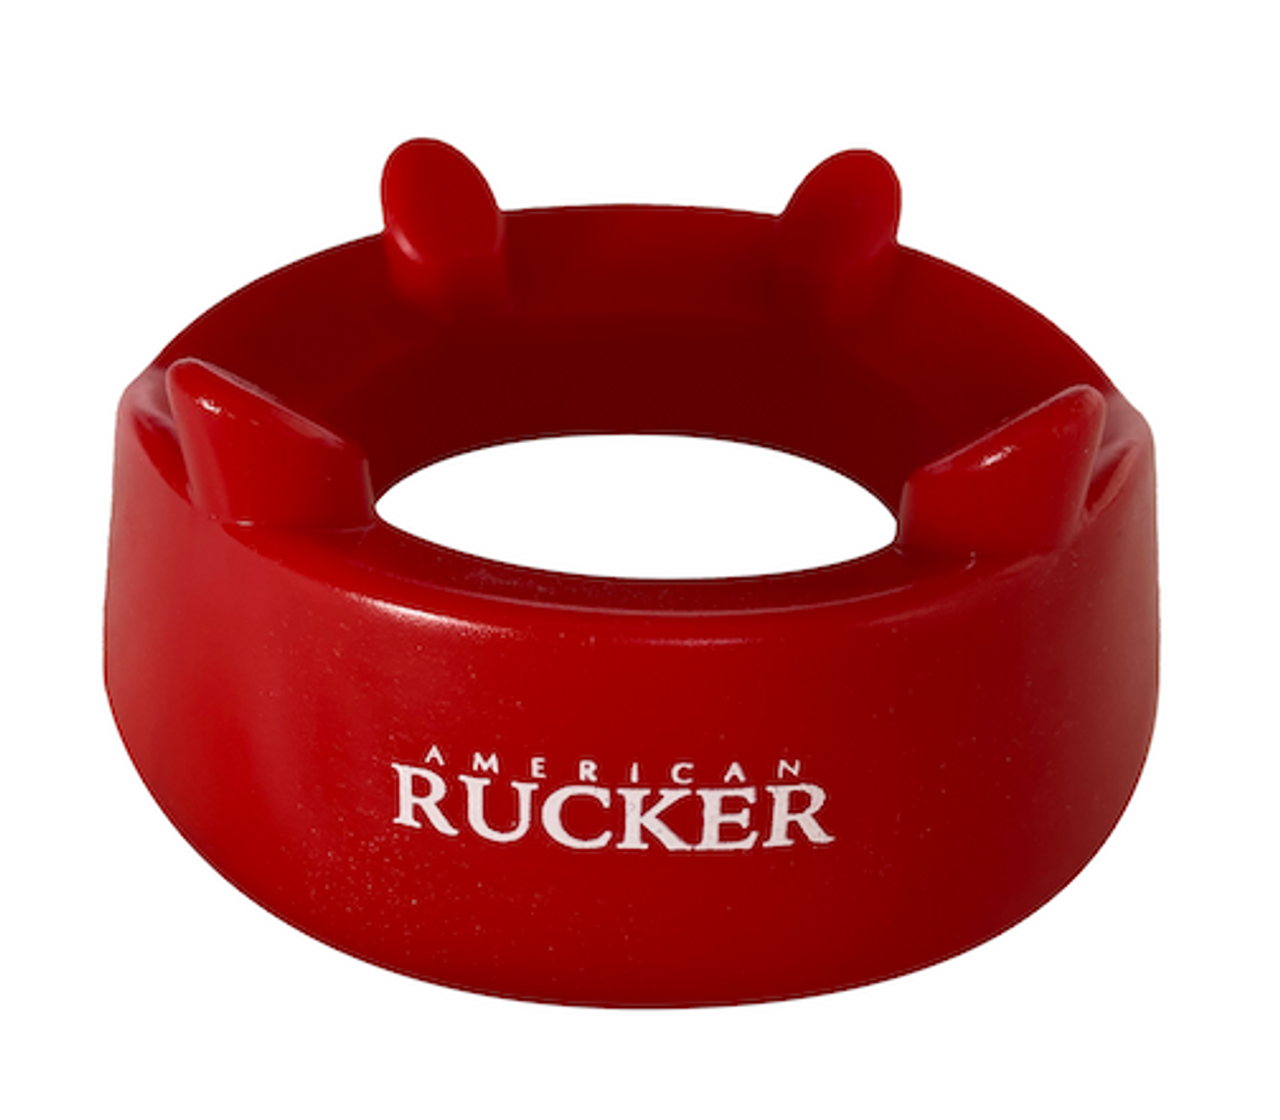 Rugby Kicking Tee, Rugby